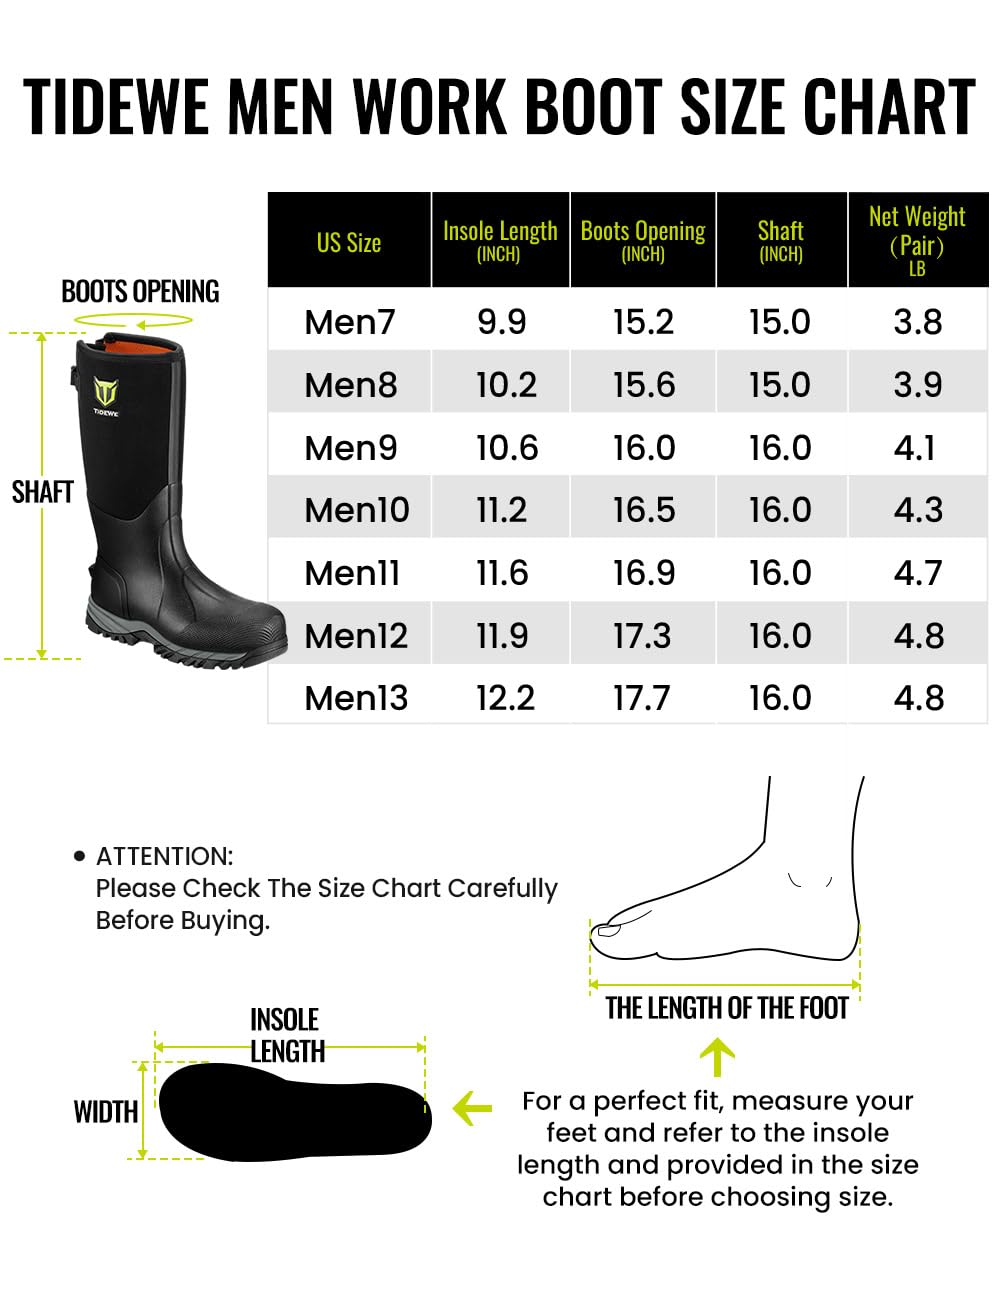 TIDEWE Work Boots Puncture-Proof with Steel Toe & Shank, Waterproof Anti Slip Rubber Boots for men, 6mm Neoprene Outdoor Boots, Durable Hunting Boots for Manufacturing, Construction, Farming(Black,Size 7-13)